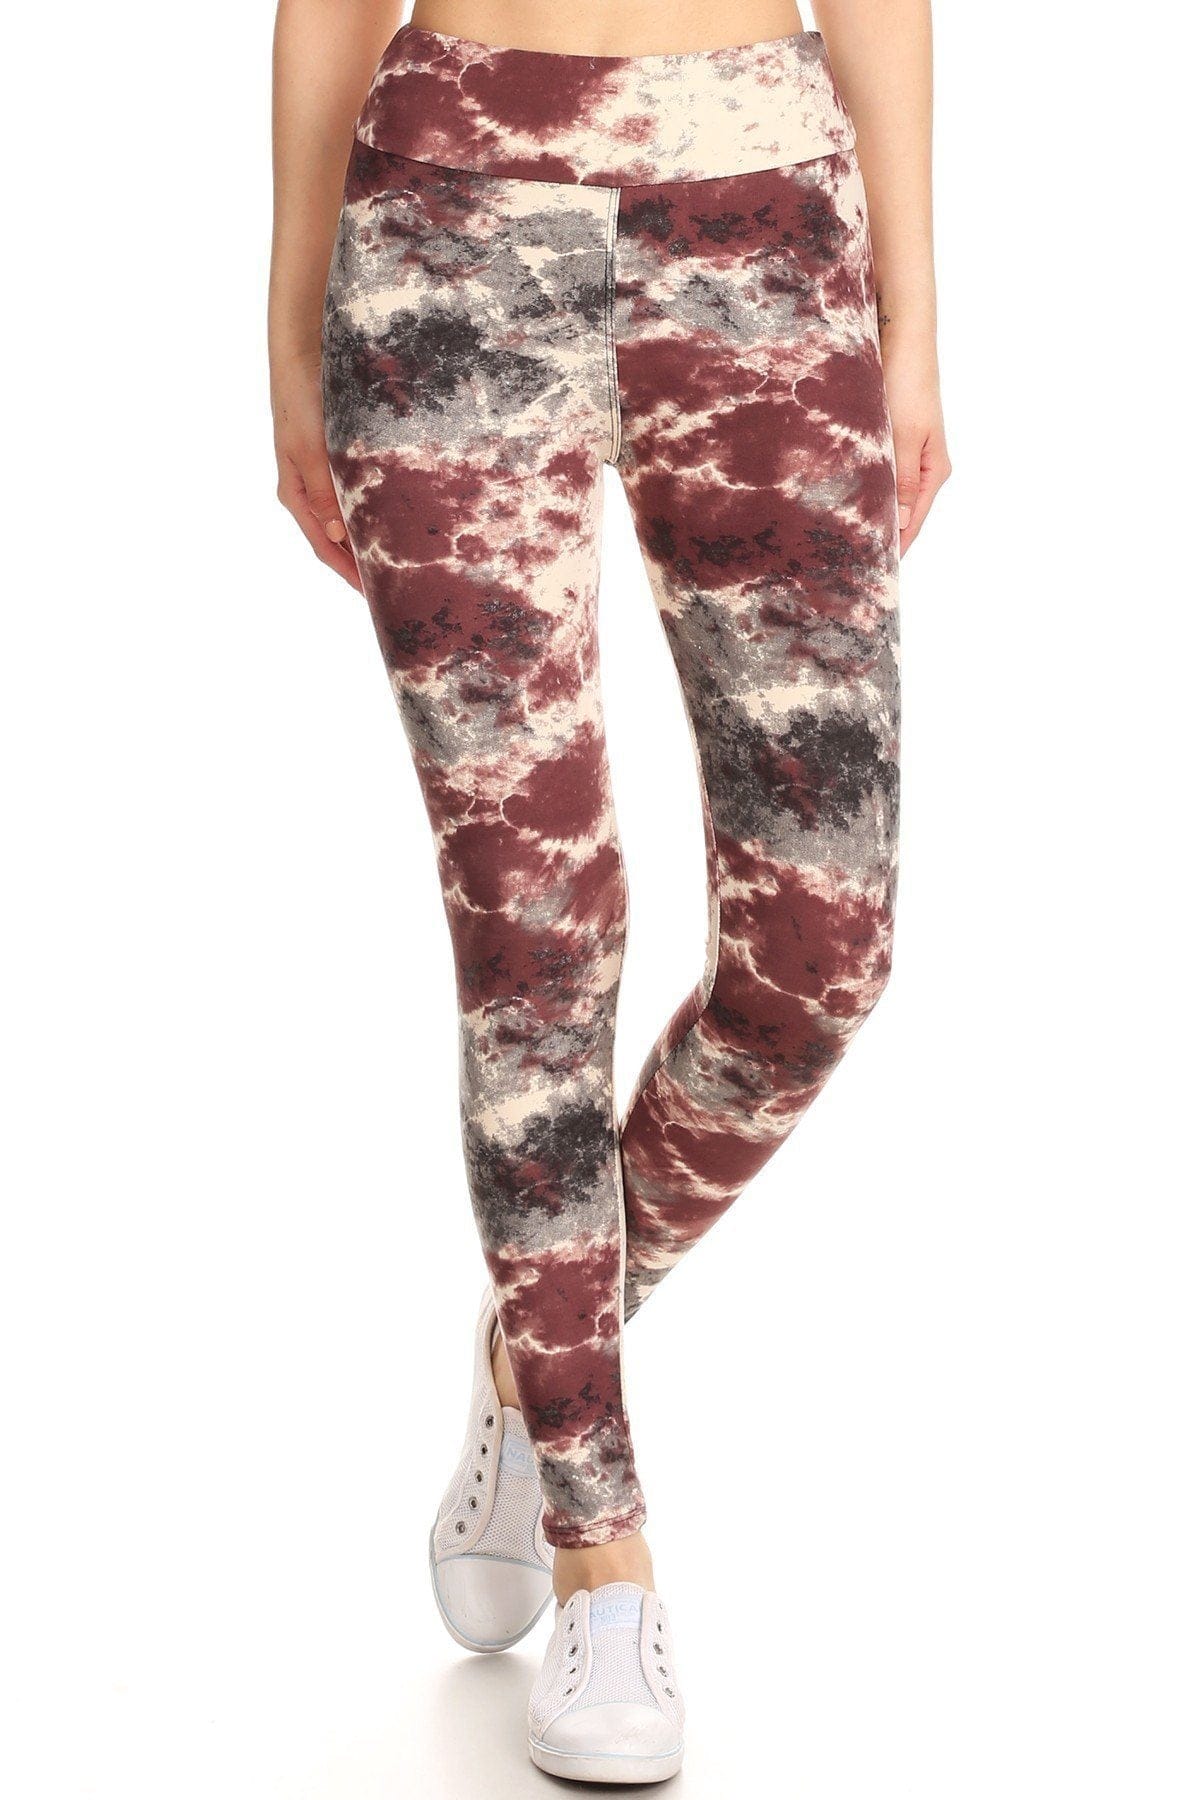 Yoga Style Banded Lined Tie Dye Print, Full Length Leggings In A Slim Fitting - Fashion Quality Boutik